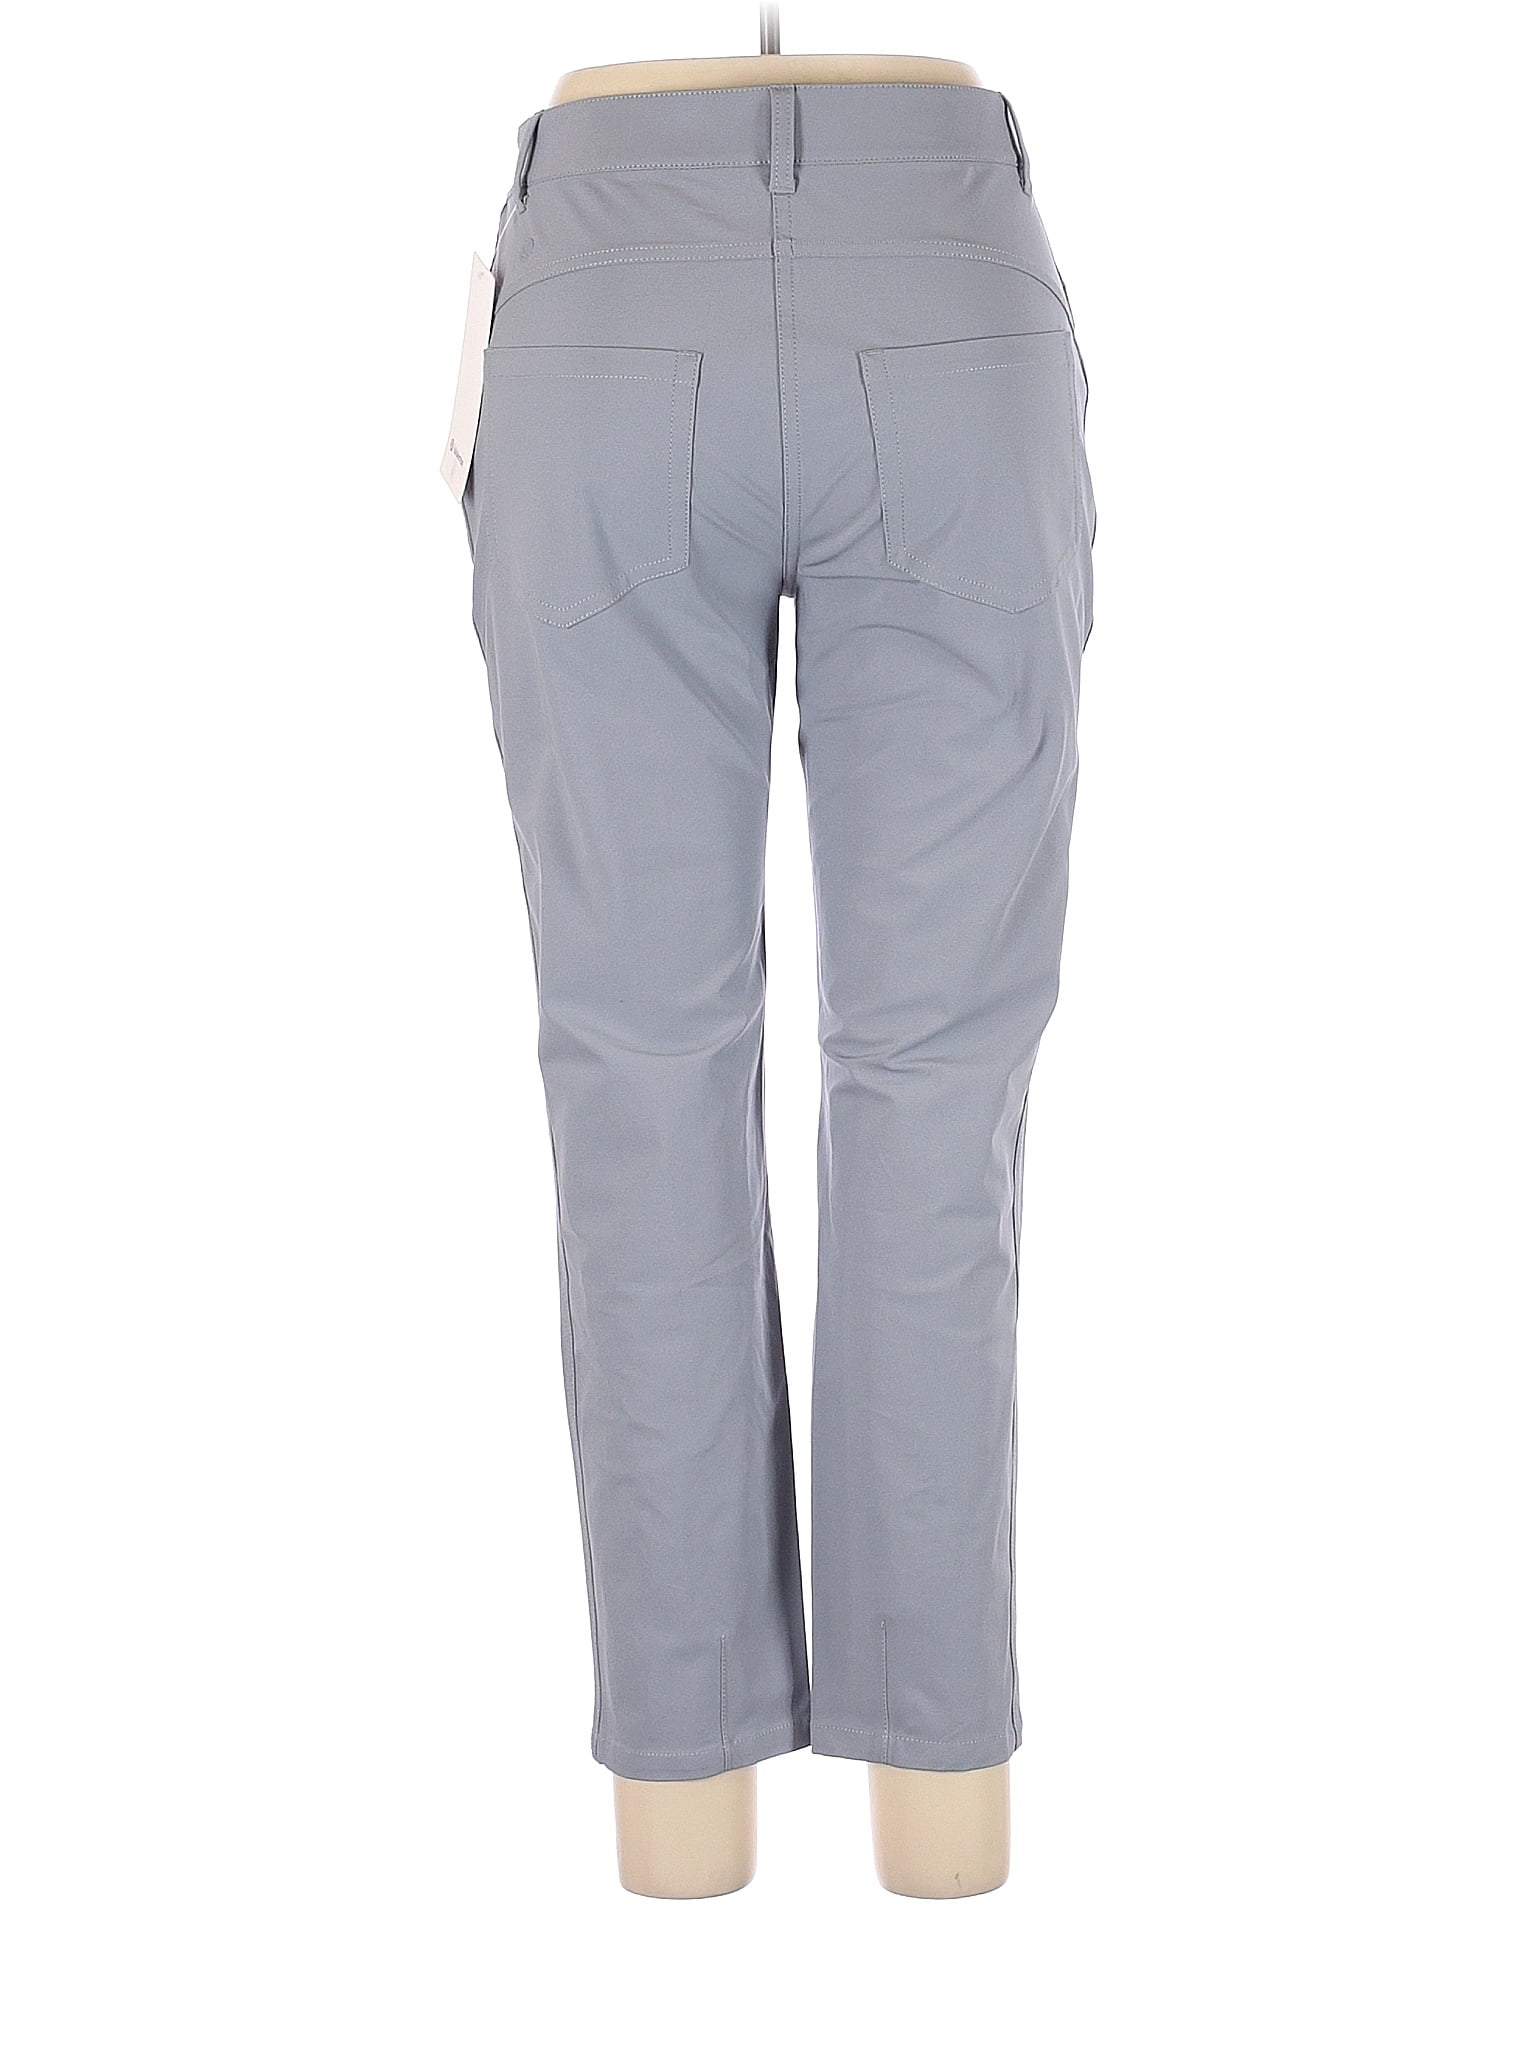 Lululemon Athletica Solid Blue Gray Casual Pants Size 10 - 59% off